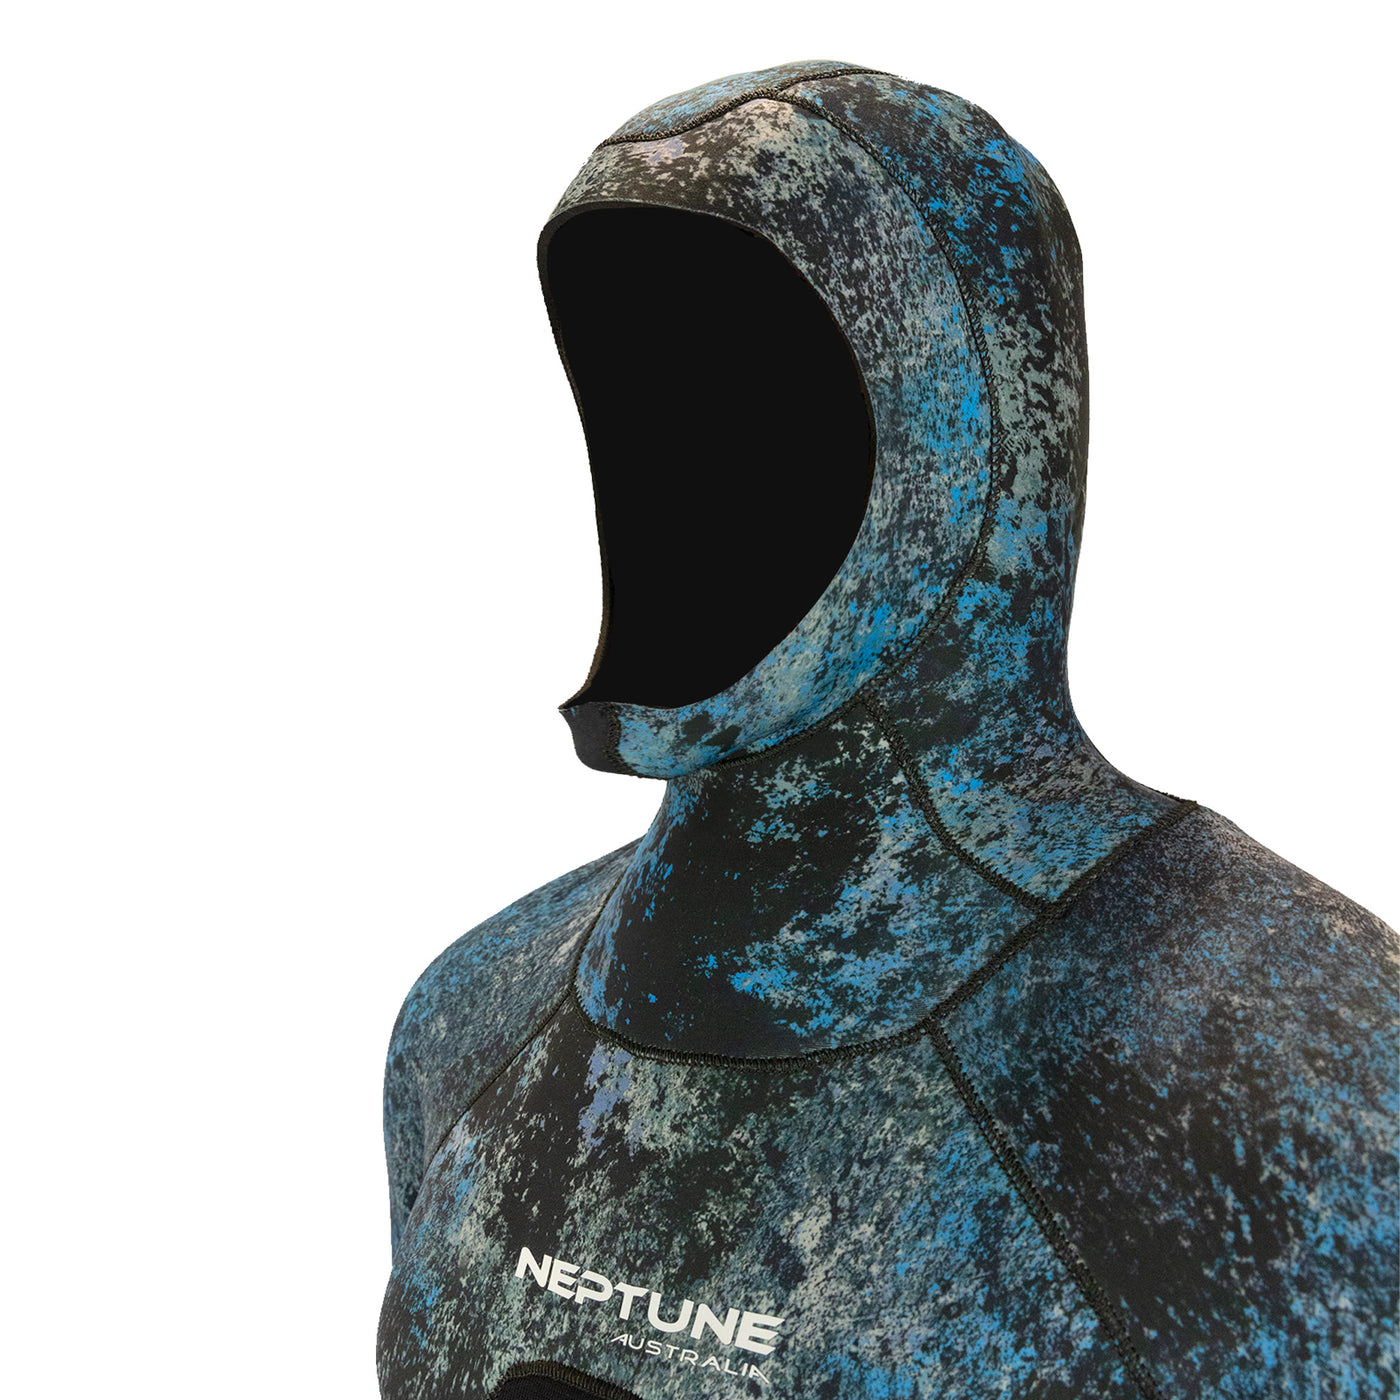 Mens Open Cell Wetsuit